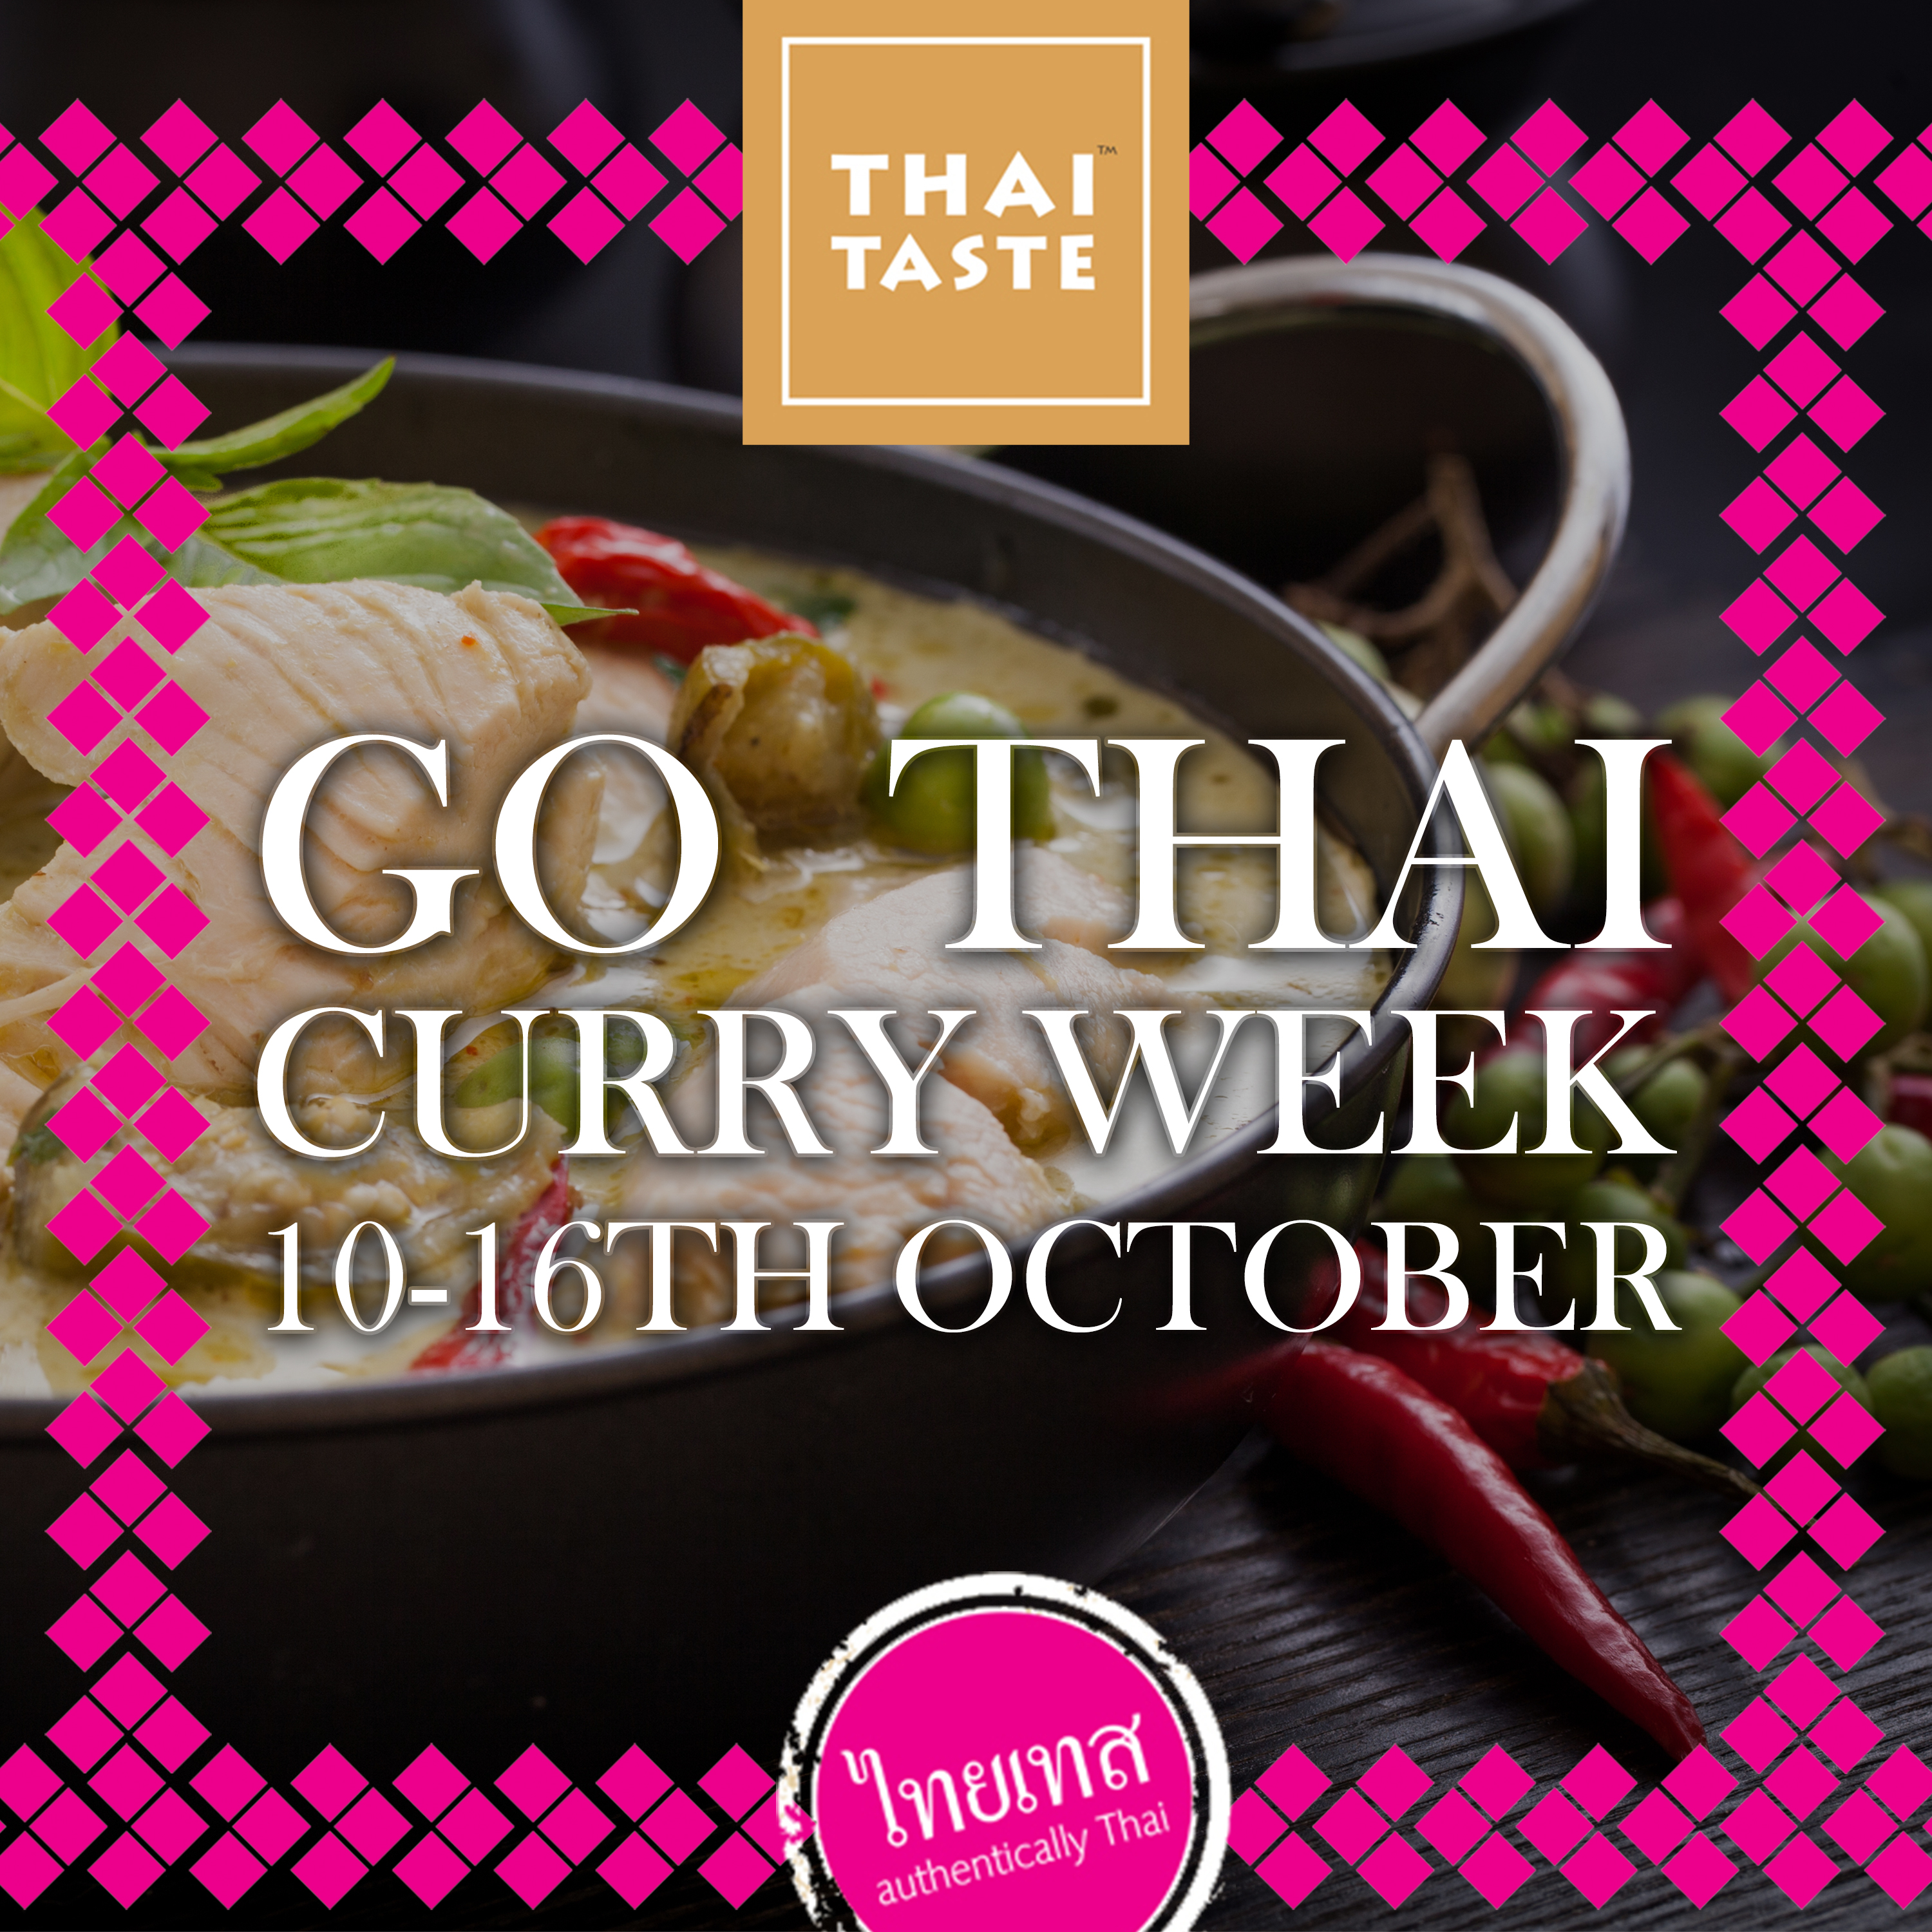 Go Curry Week Importer Distributor 